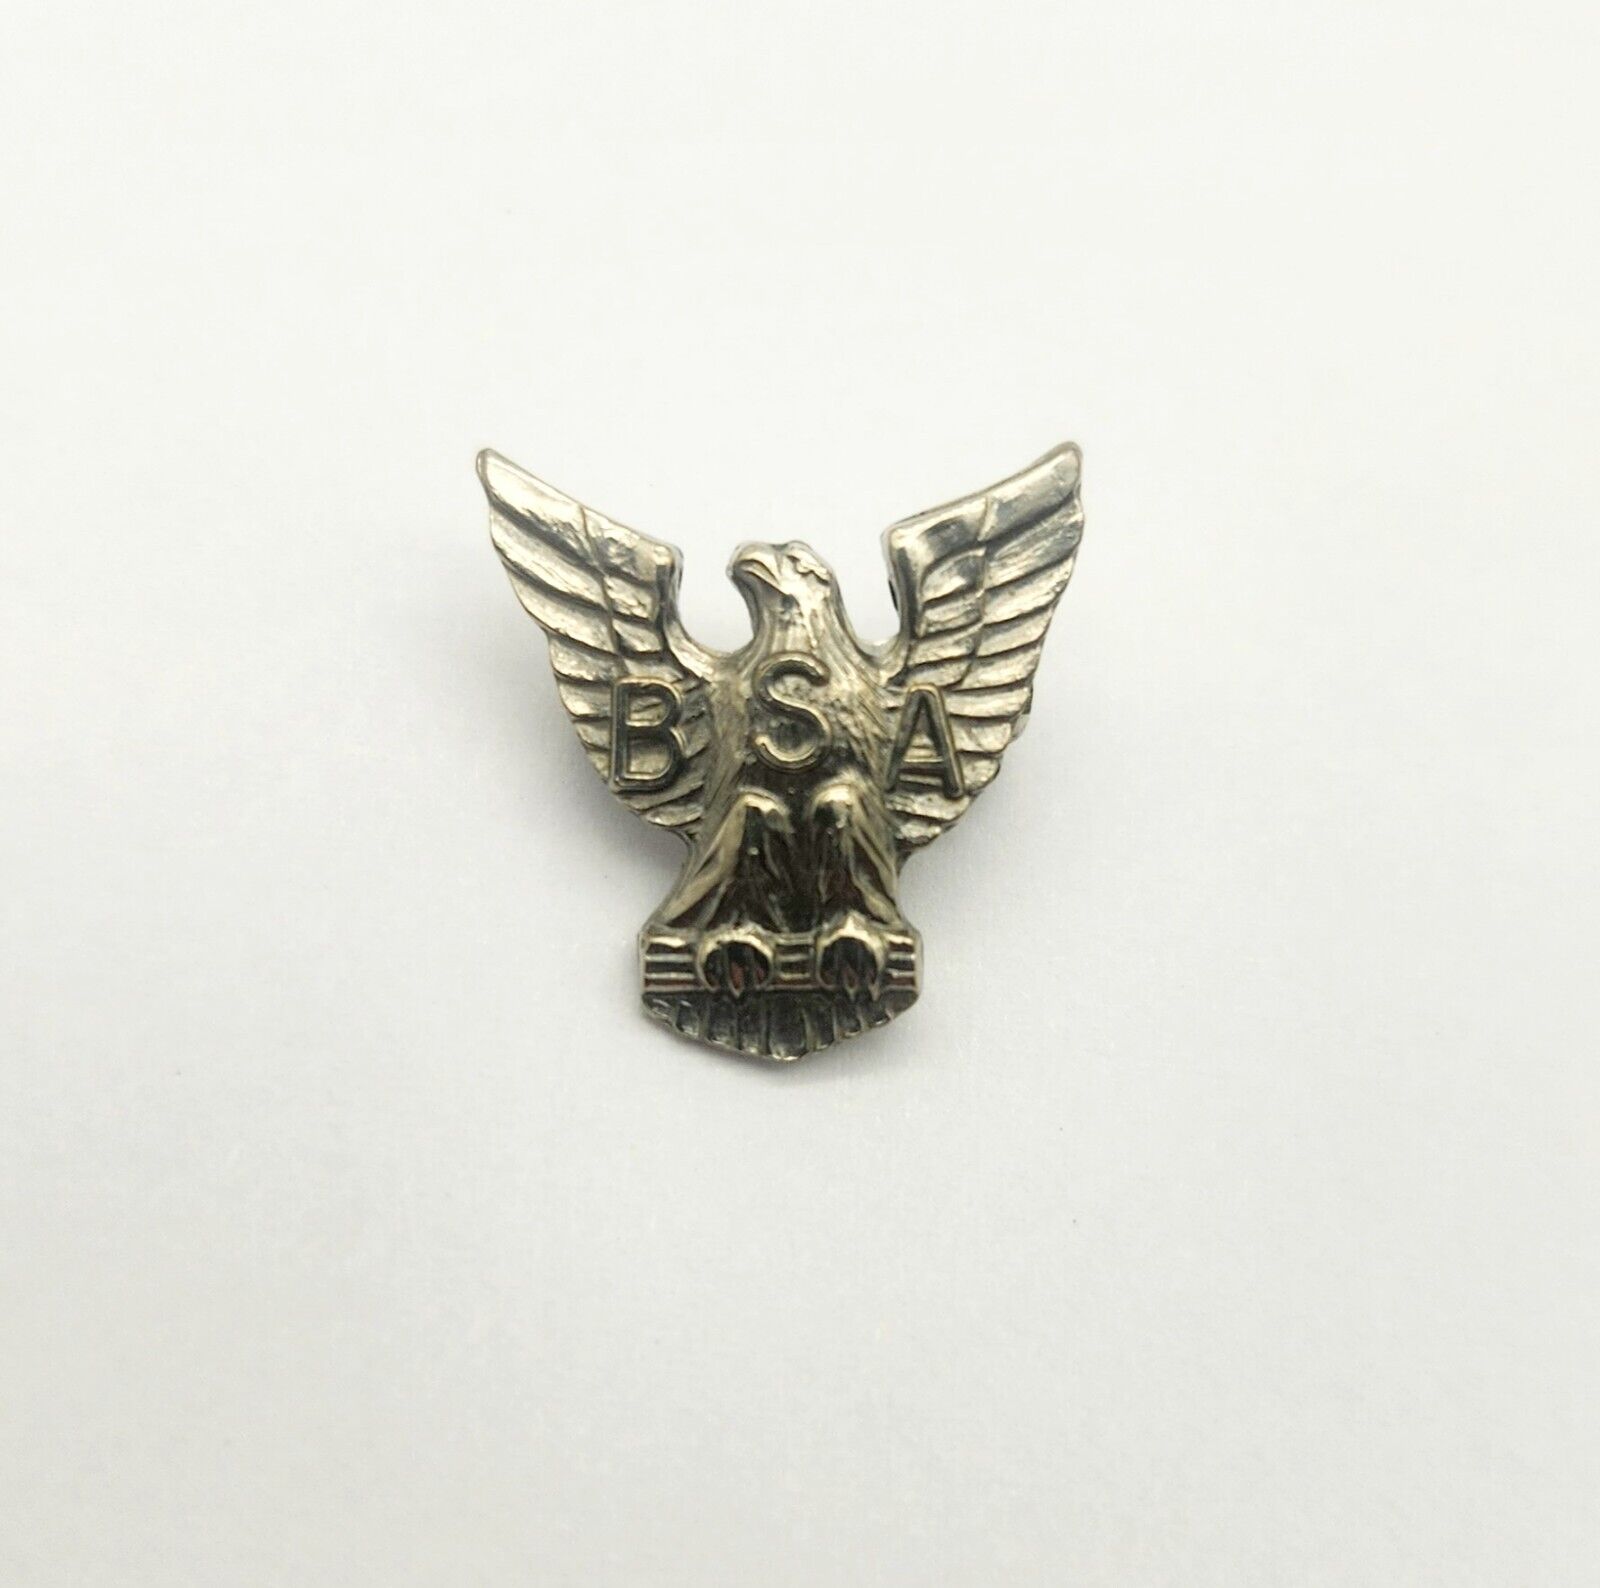 Vintage Boy Scouts of America BSA Sterling Silver Lapel Bald Eagle Pin - 2.0g